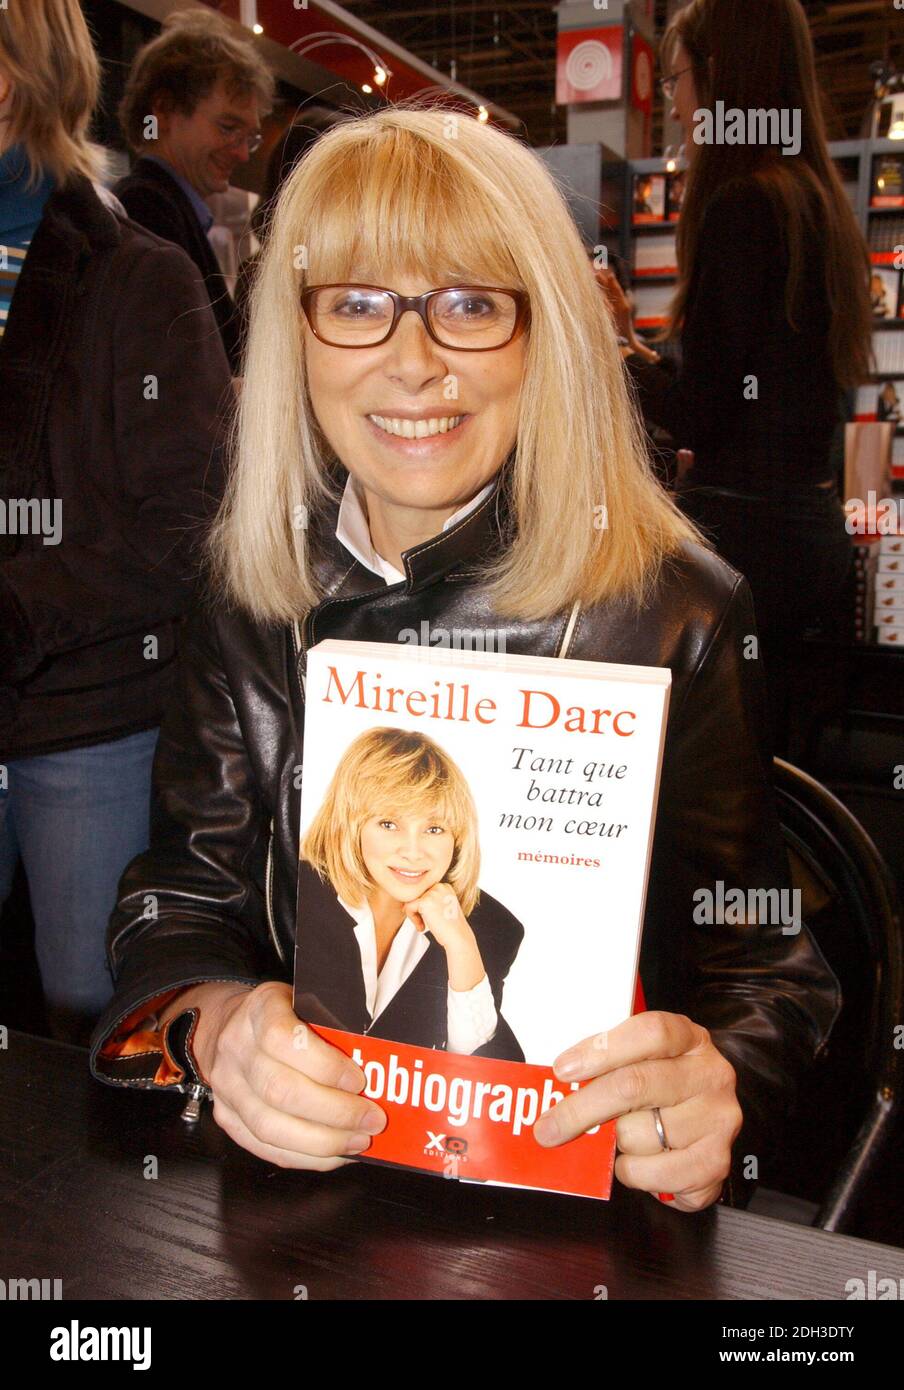 File photo - French actress Mireille Darc promotes her book 'Tant que Battra mon Coeur' during the Paris Book Fair 'Le Salon Du Livre' held at Porte de Versailles, in Paris, France, on March 19, 2006. Darc died at 79 it was announced today. She was Alain Delon's longtime co-star and companion. She appeared as a lead character in Jean-Luc Godard's 1967 film Week End. Photo by Bruno Klein/ABACAPRESS.COM Stock Photo